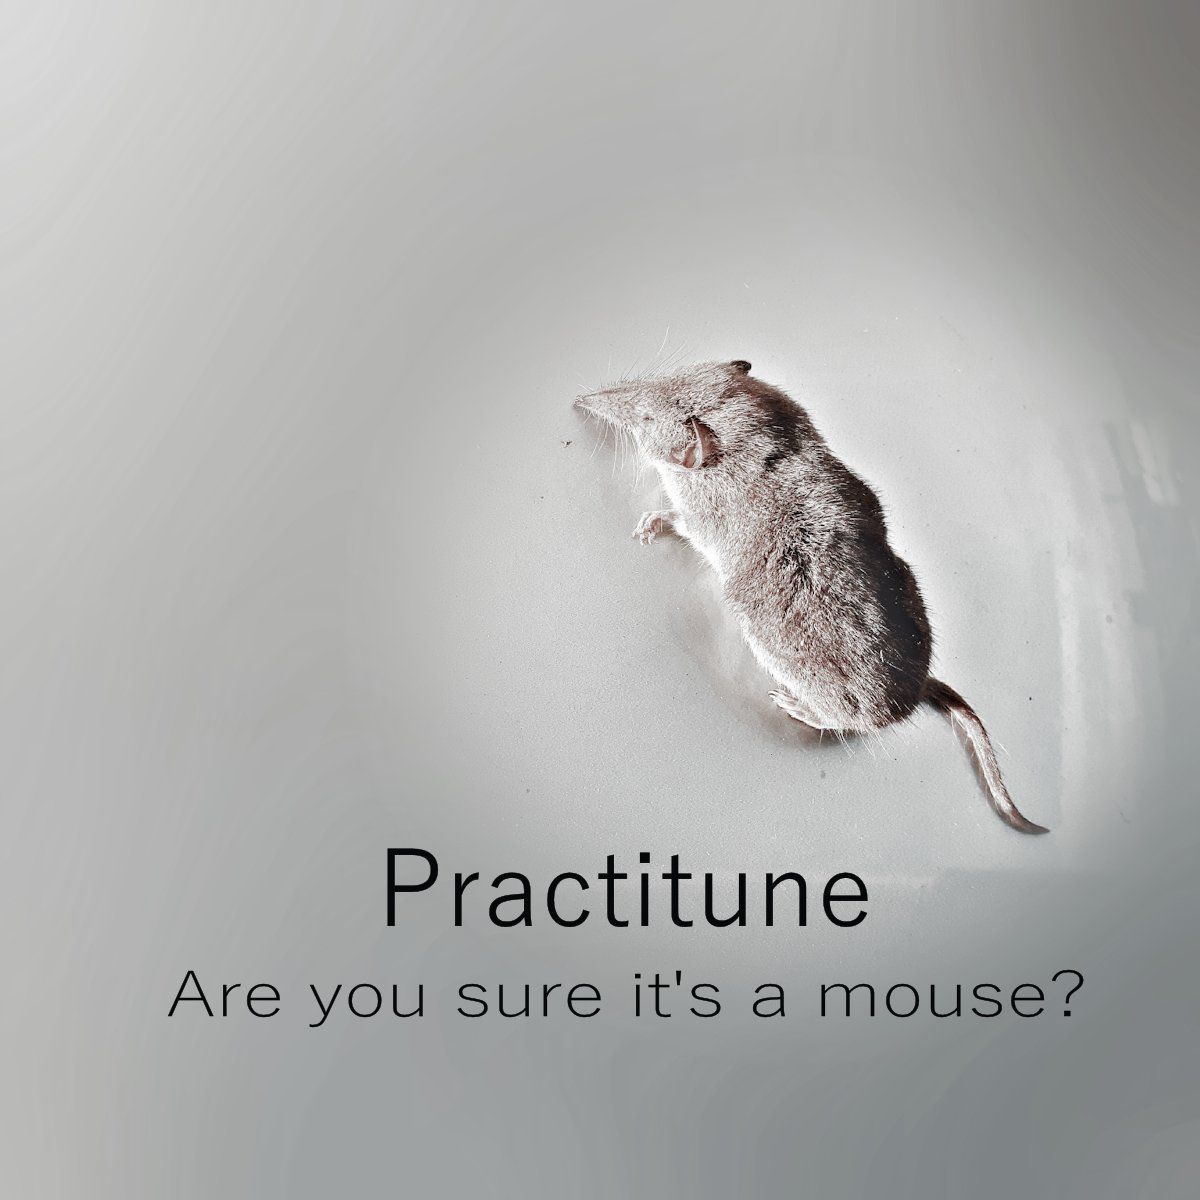 Practitune-Are you sure it's a mouse?